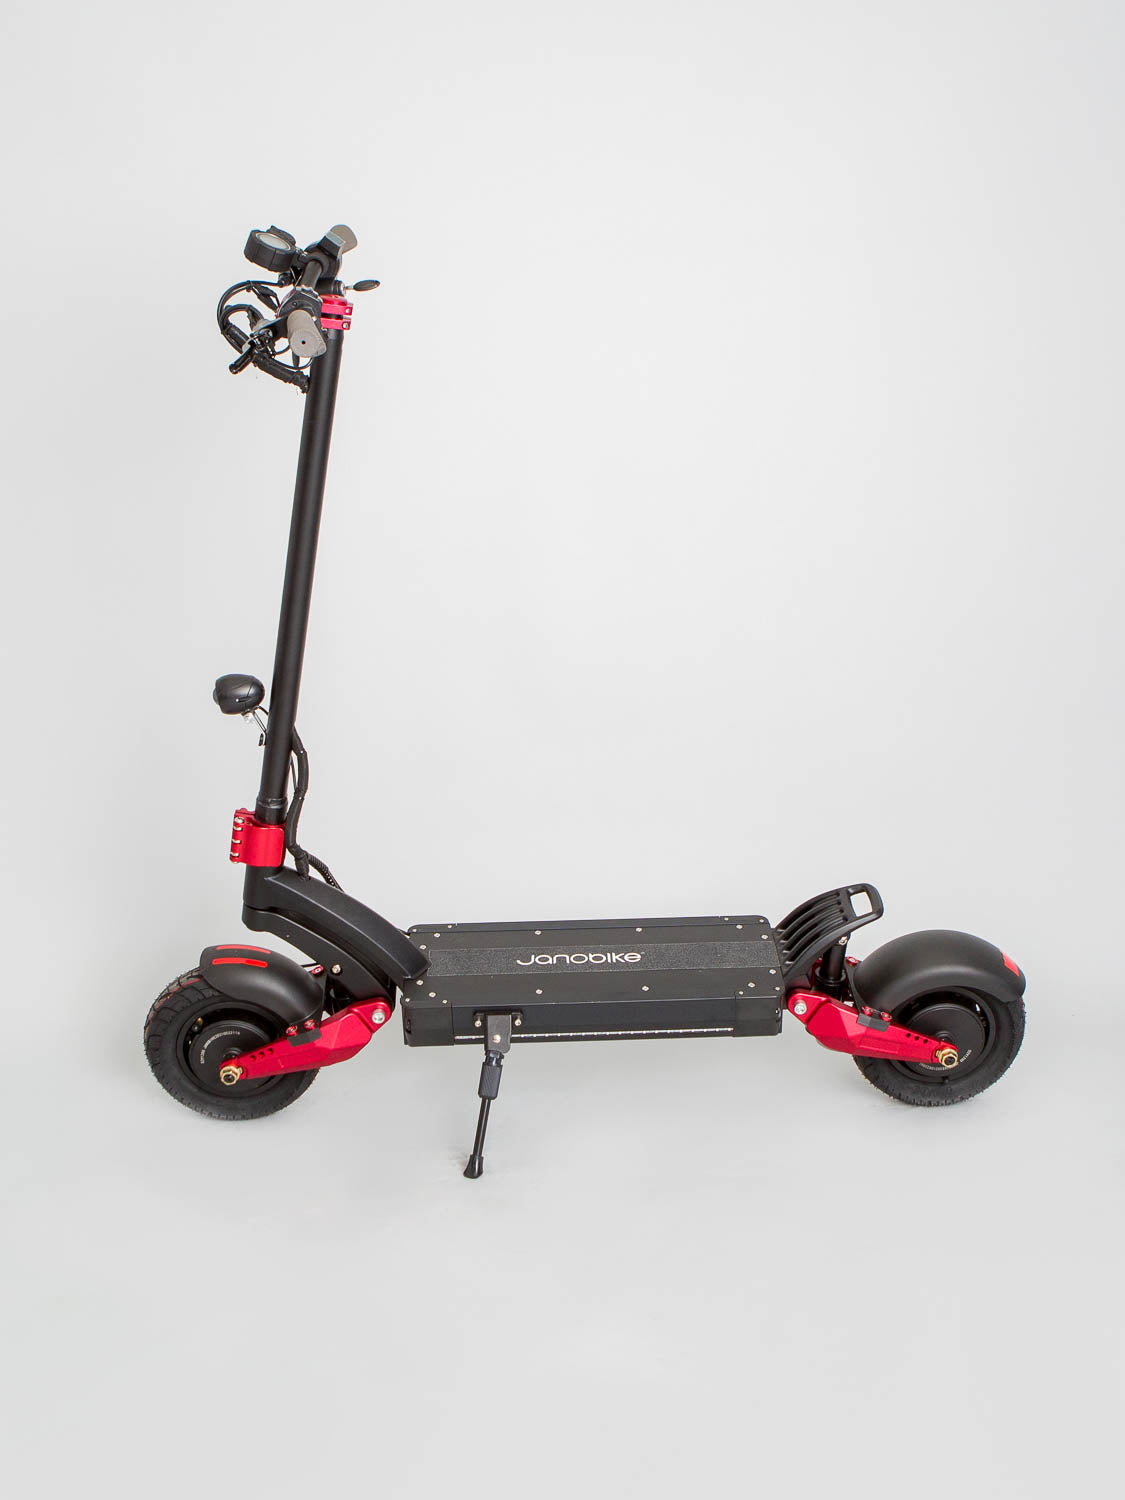 X10 SPORT SCOOTER - 270 KM DEMO CLEARANCE - IN STORE PICK-UP ONLY